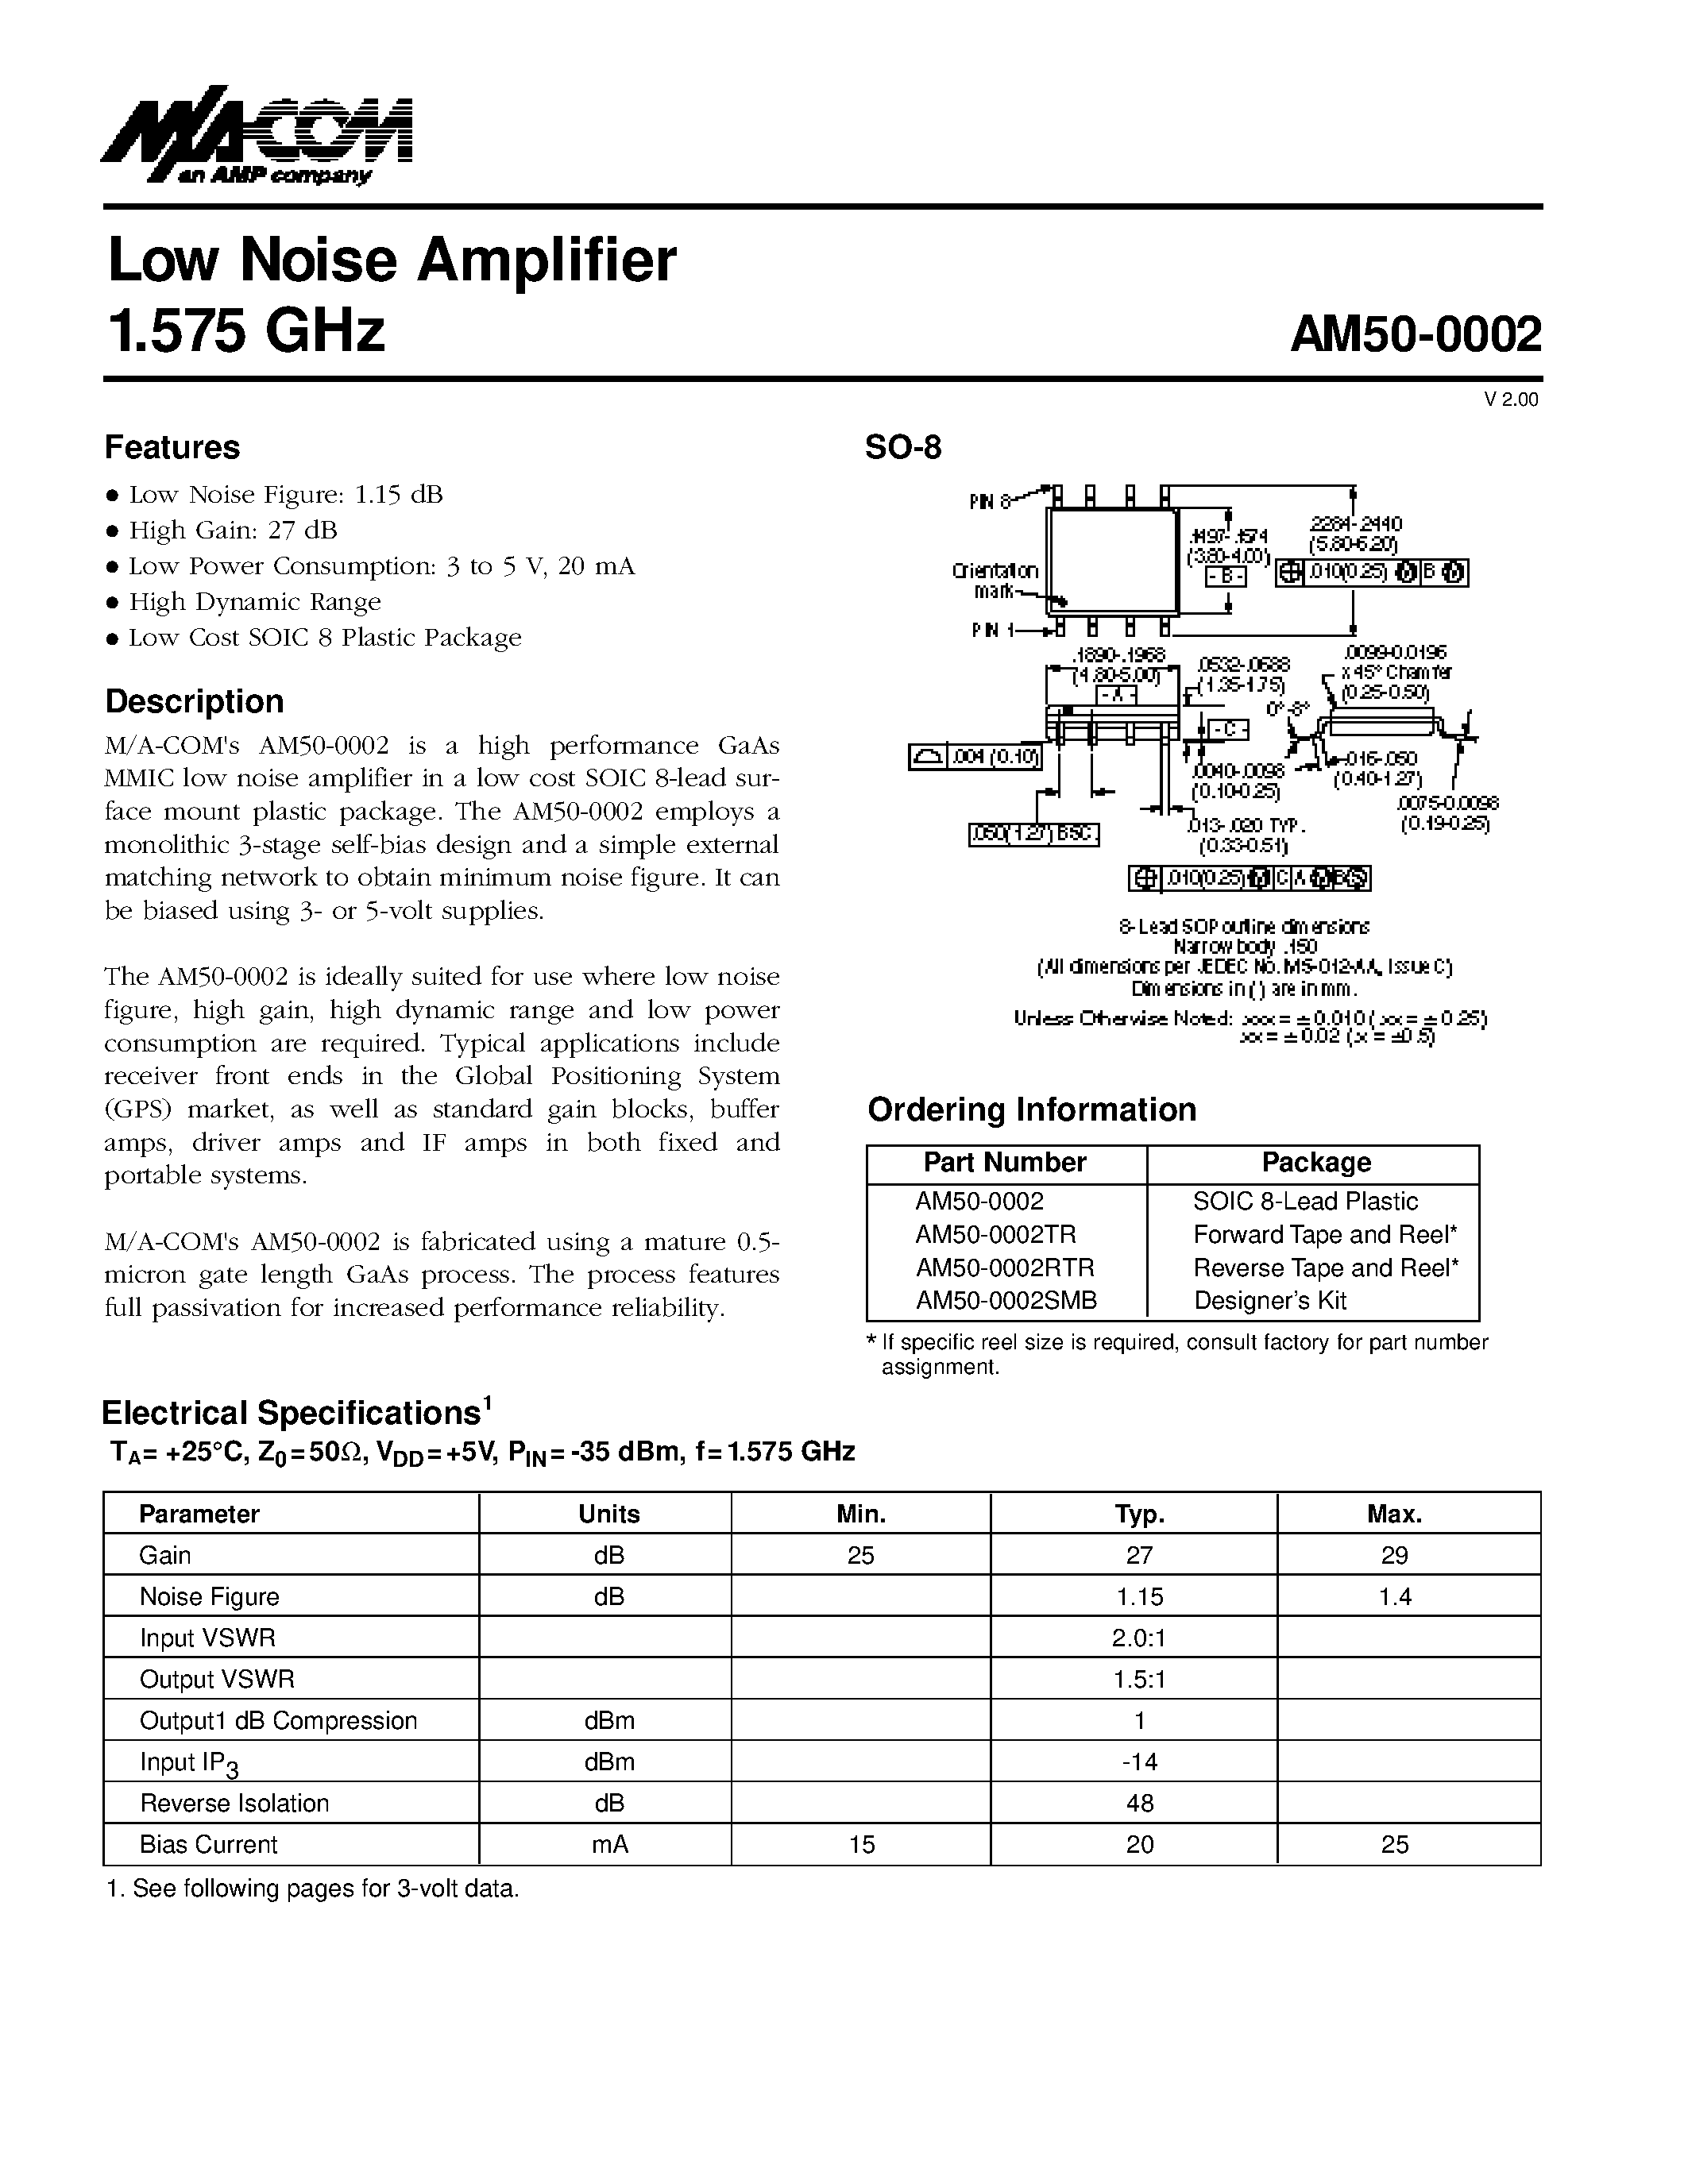 Datasheet AM50-0002RTR - Low Noise Amplifier 1.575 GHz page 1